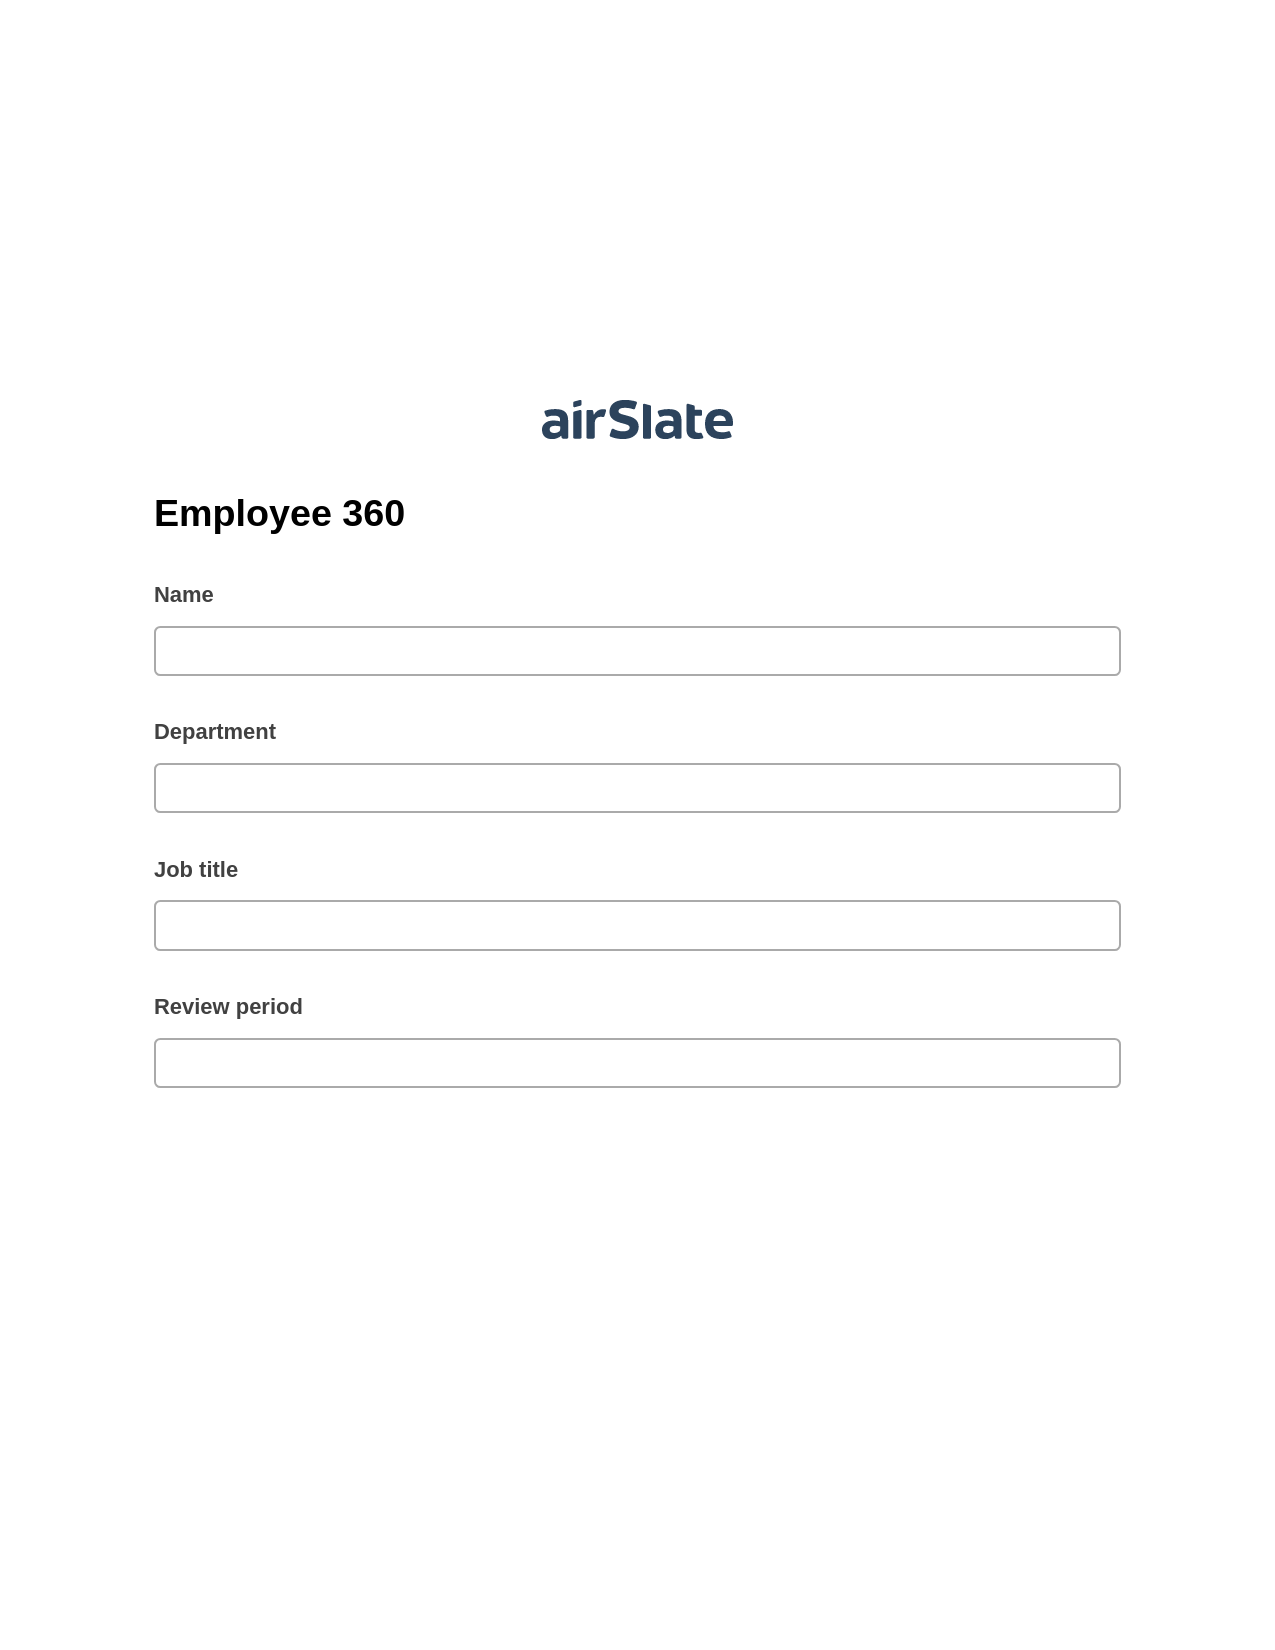 Multirole Employee 360 Pre-fill from Office 365 Excel Bot, Update MS Dynamics 365 Record Bot, Export to Salesforce Record Bot